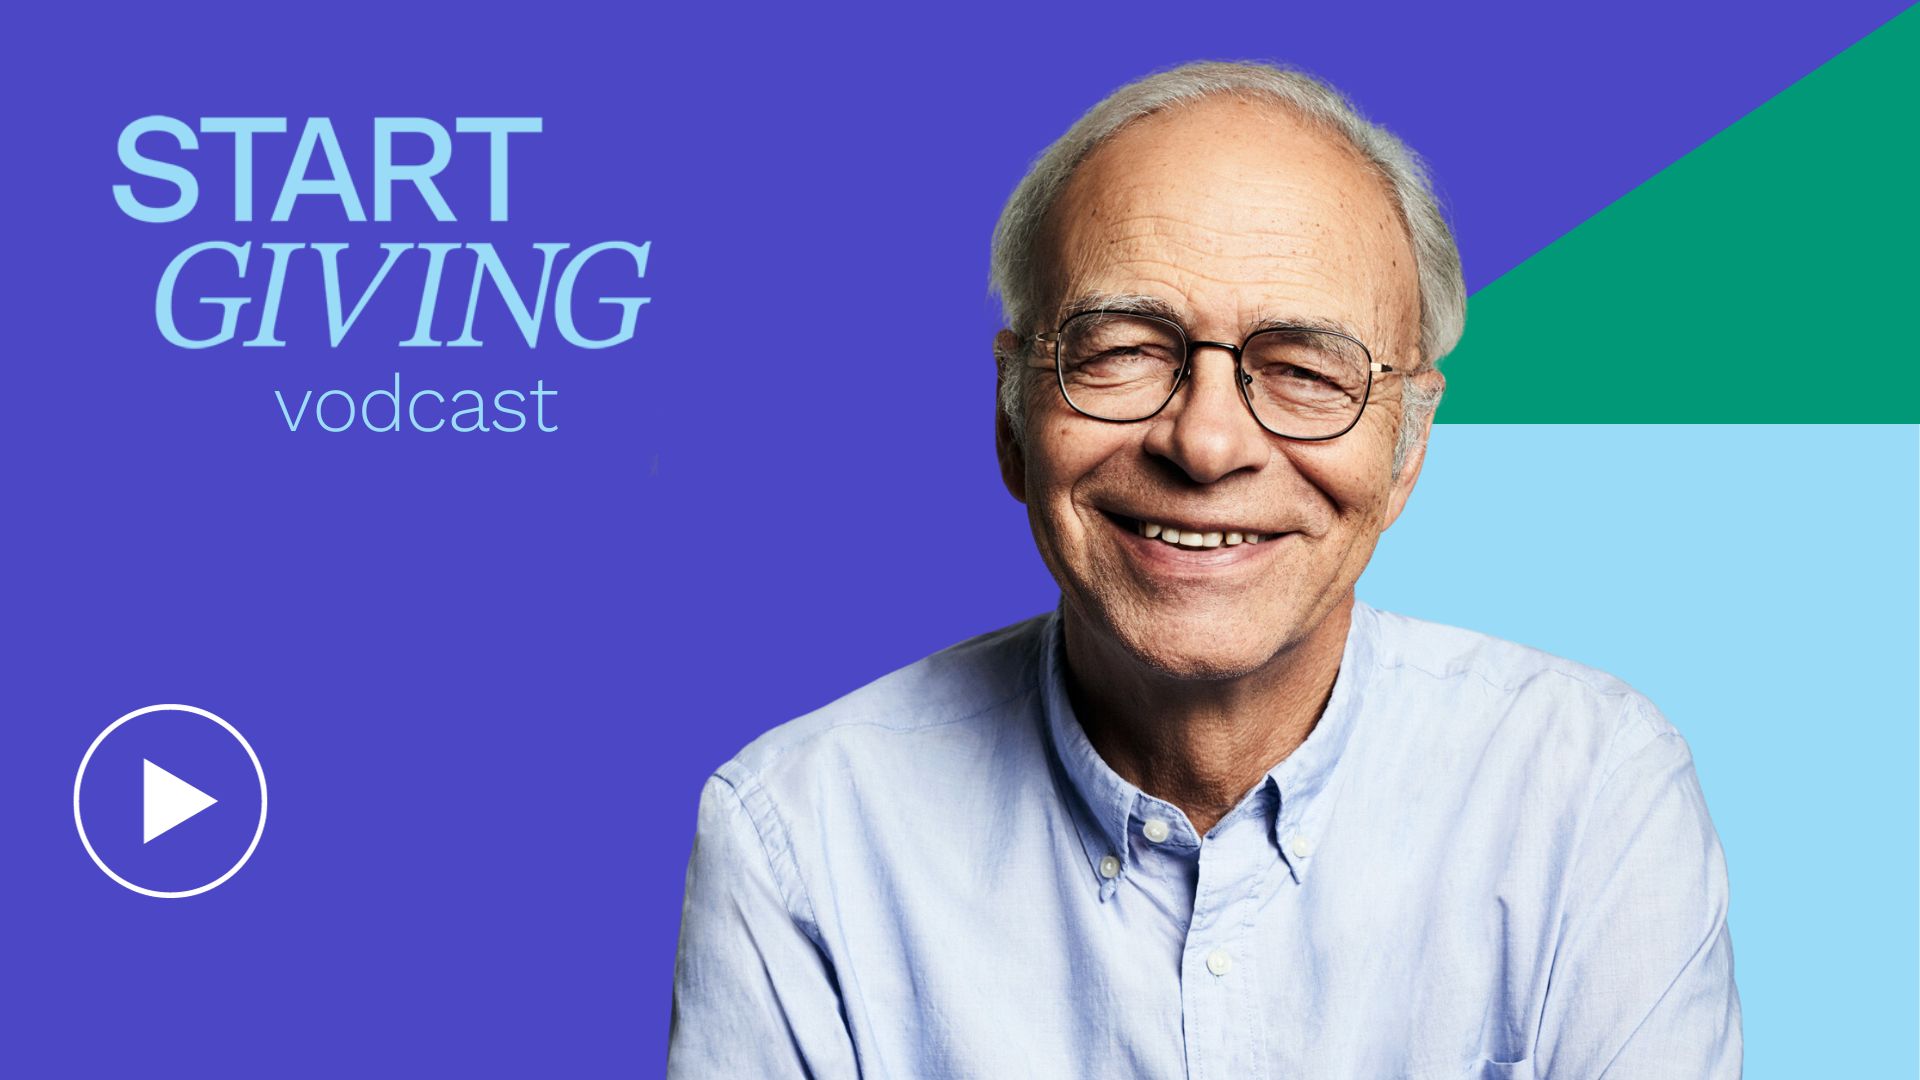 StartGiving vodcast with Peter Singer